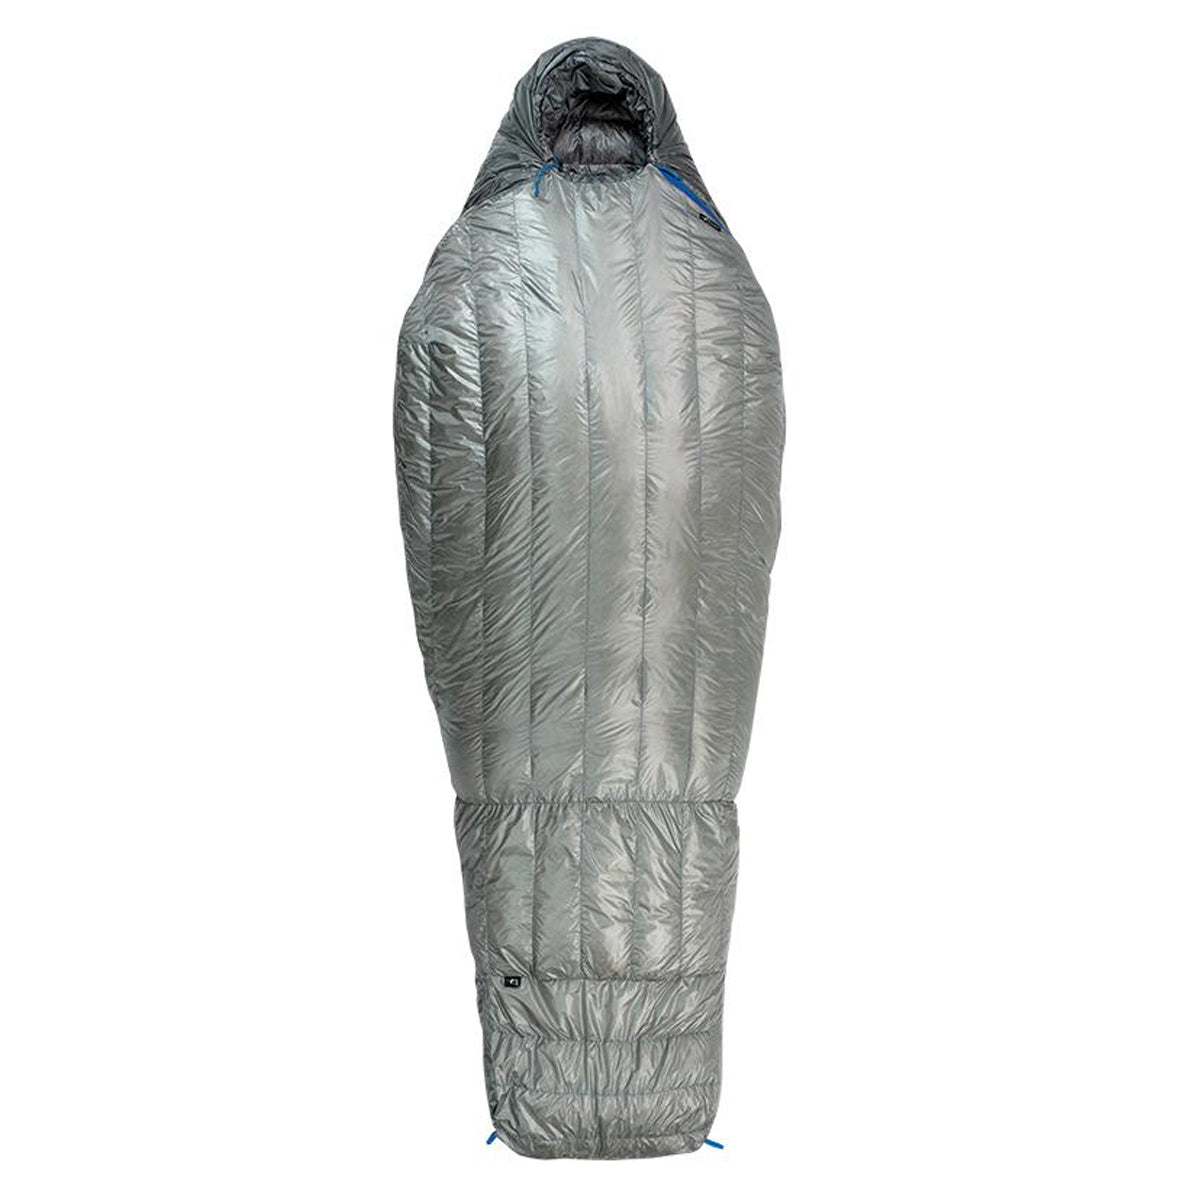 Stone Glacier Chilkoot 15° Sleeping Bag in Stone Glacier Chilkoot 15º Sleeping Bag by Stone Glacier | Camping - goHUNT Shop by GOHUNT | Stone Glacier - GOHUNT Shop